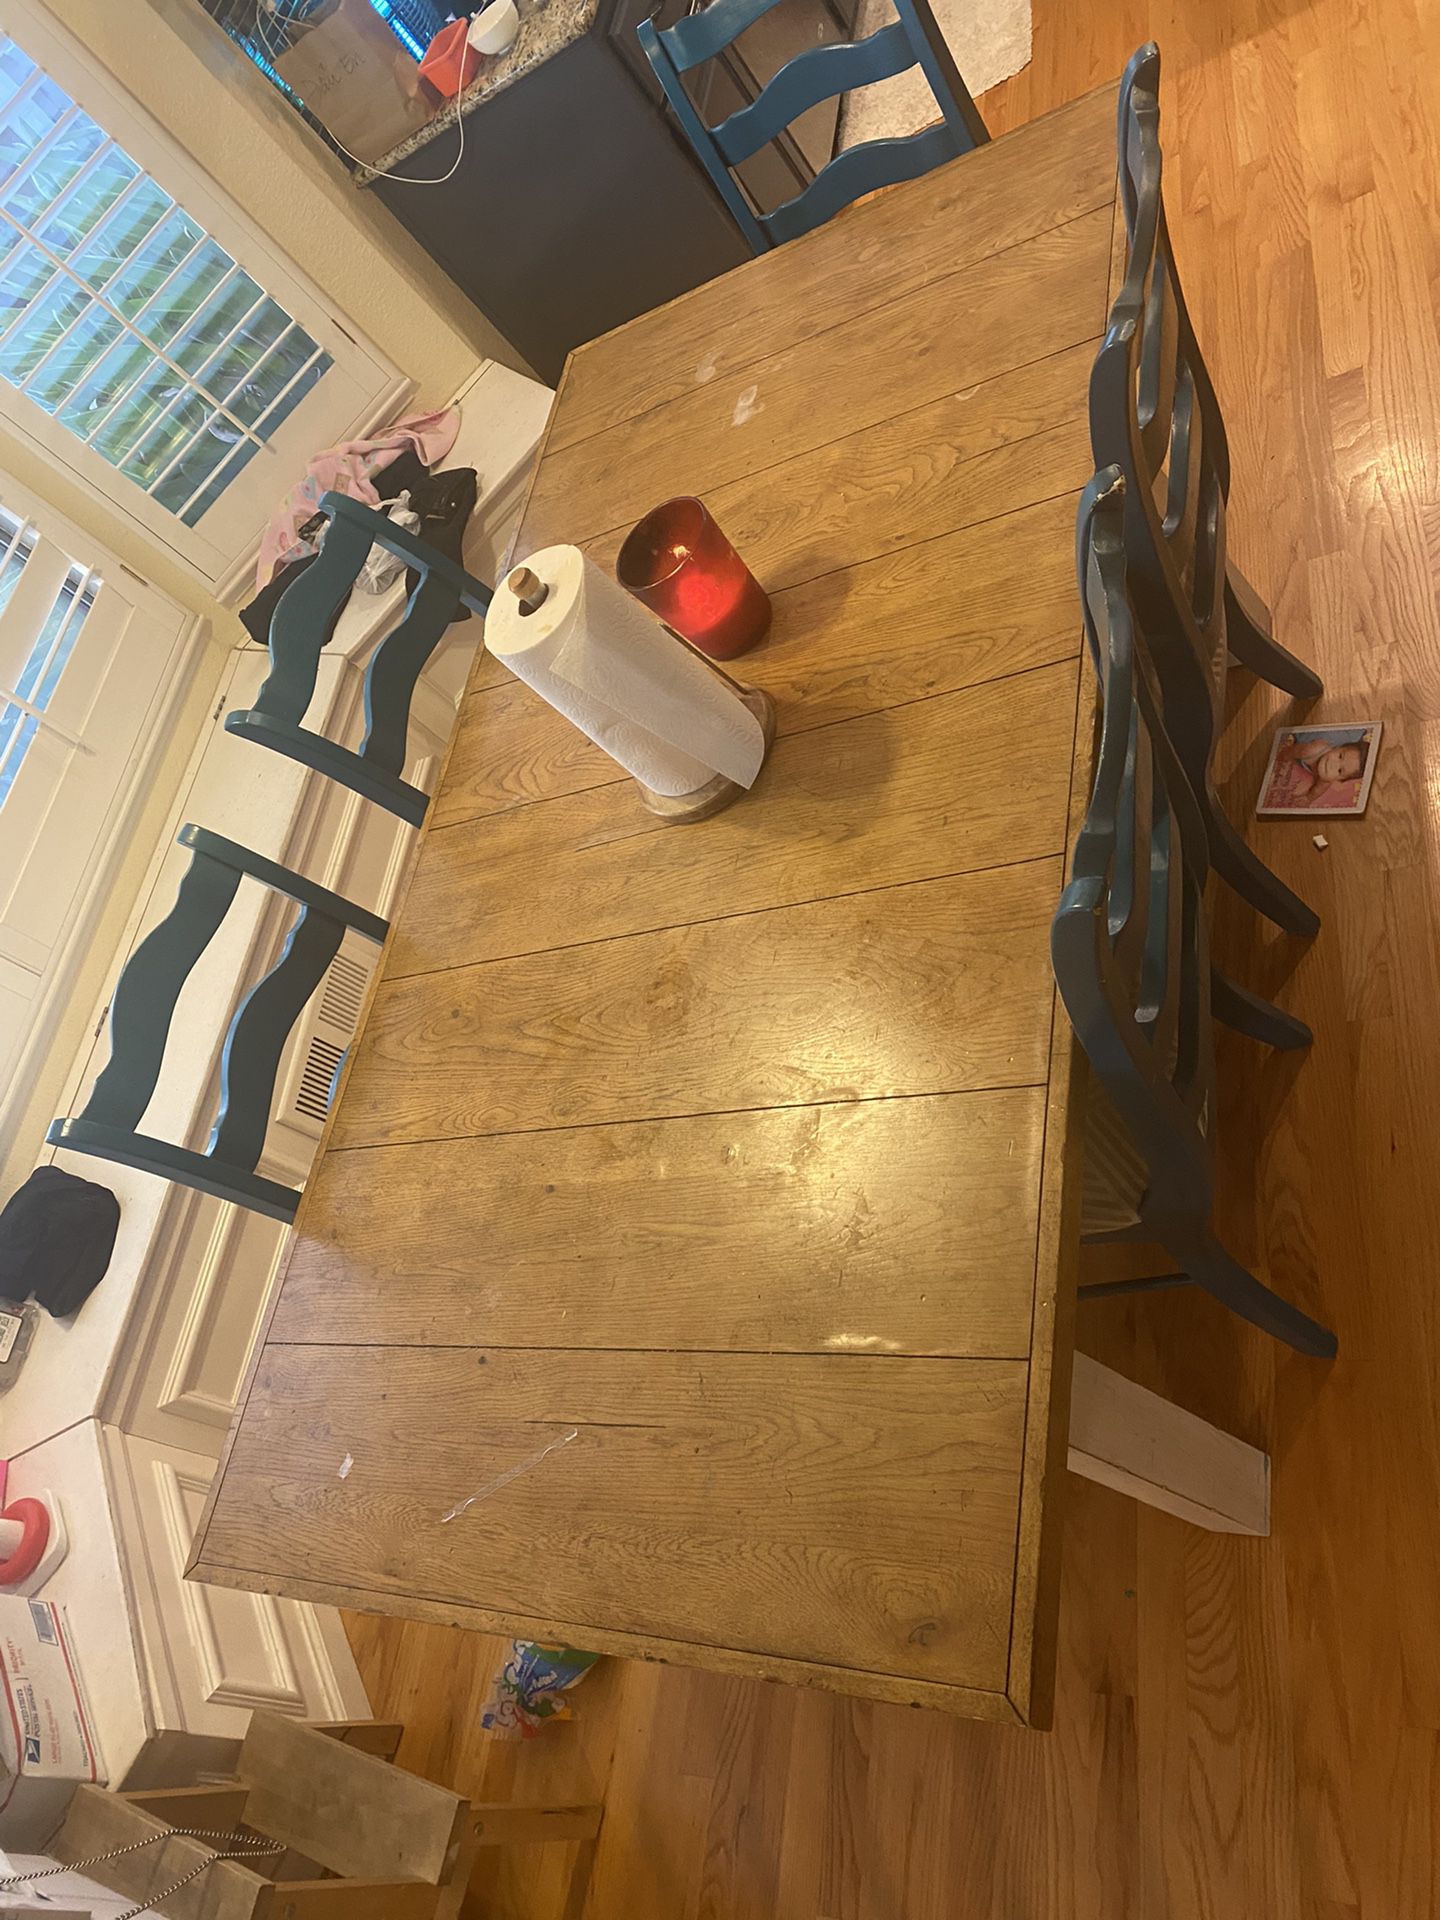 Kitchen Table Set And Chair 